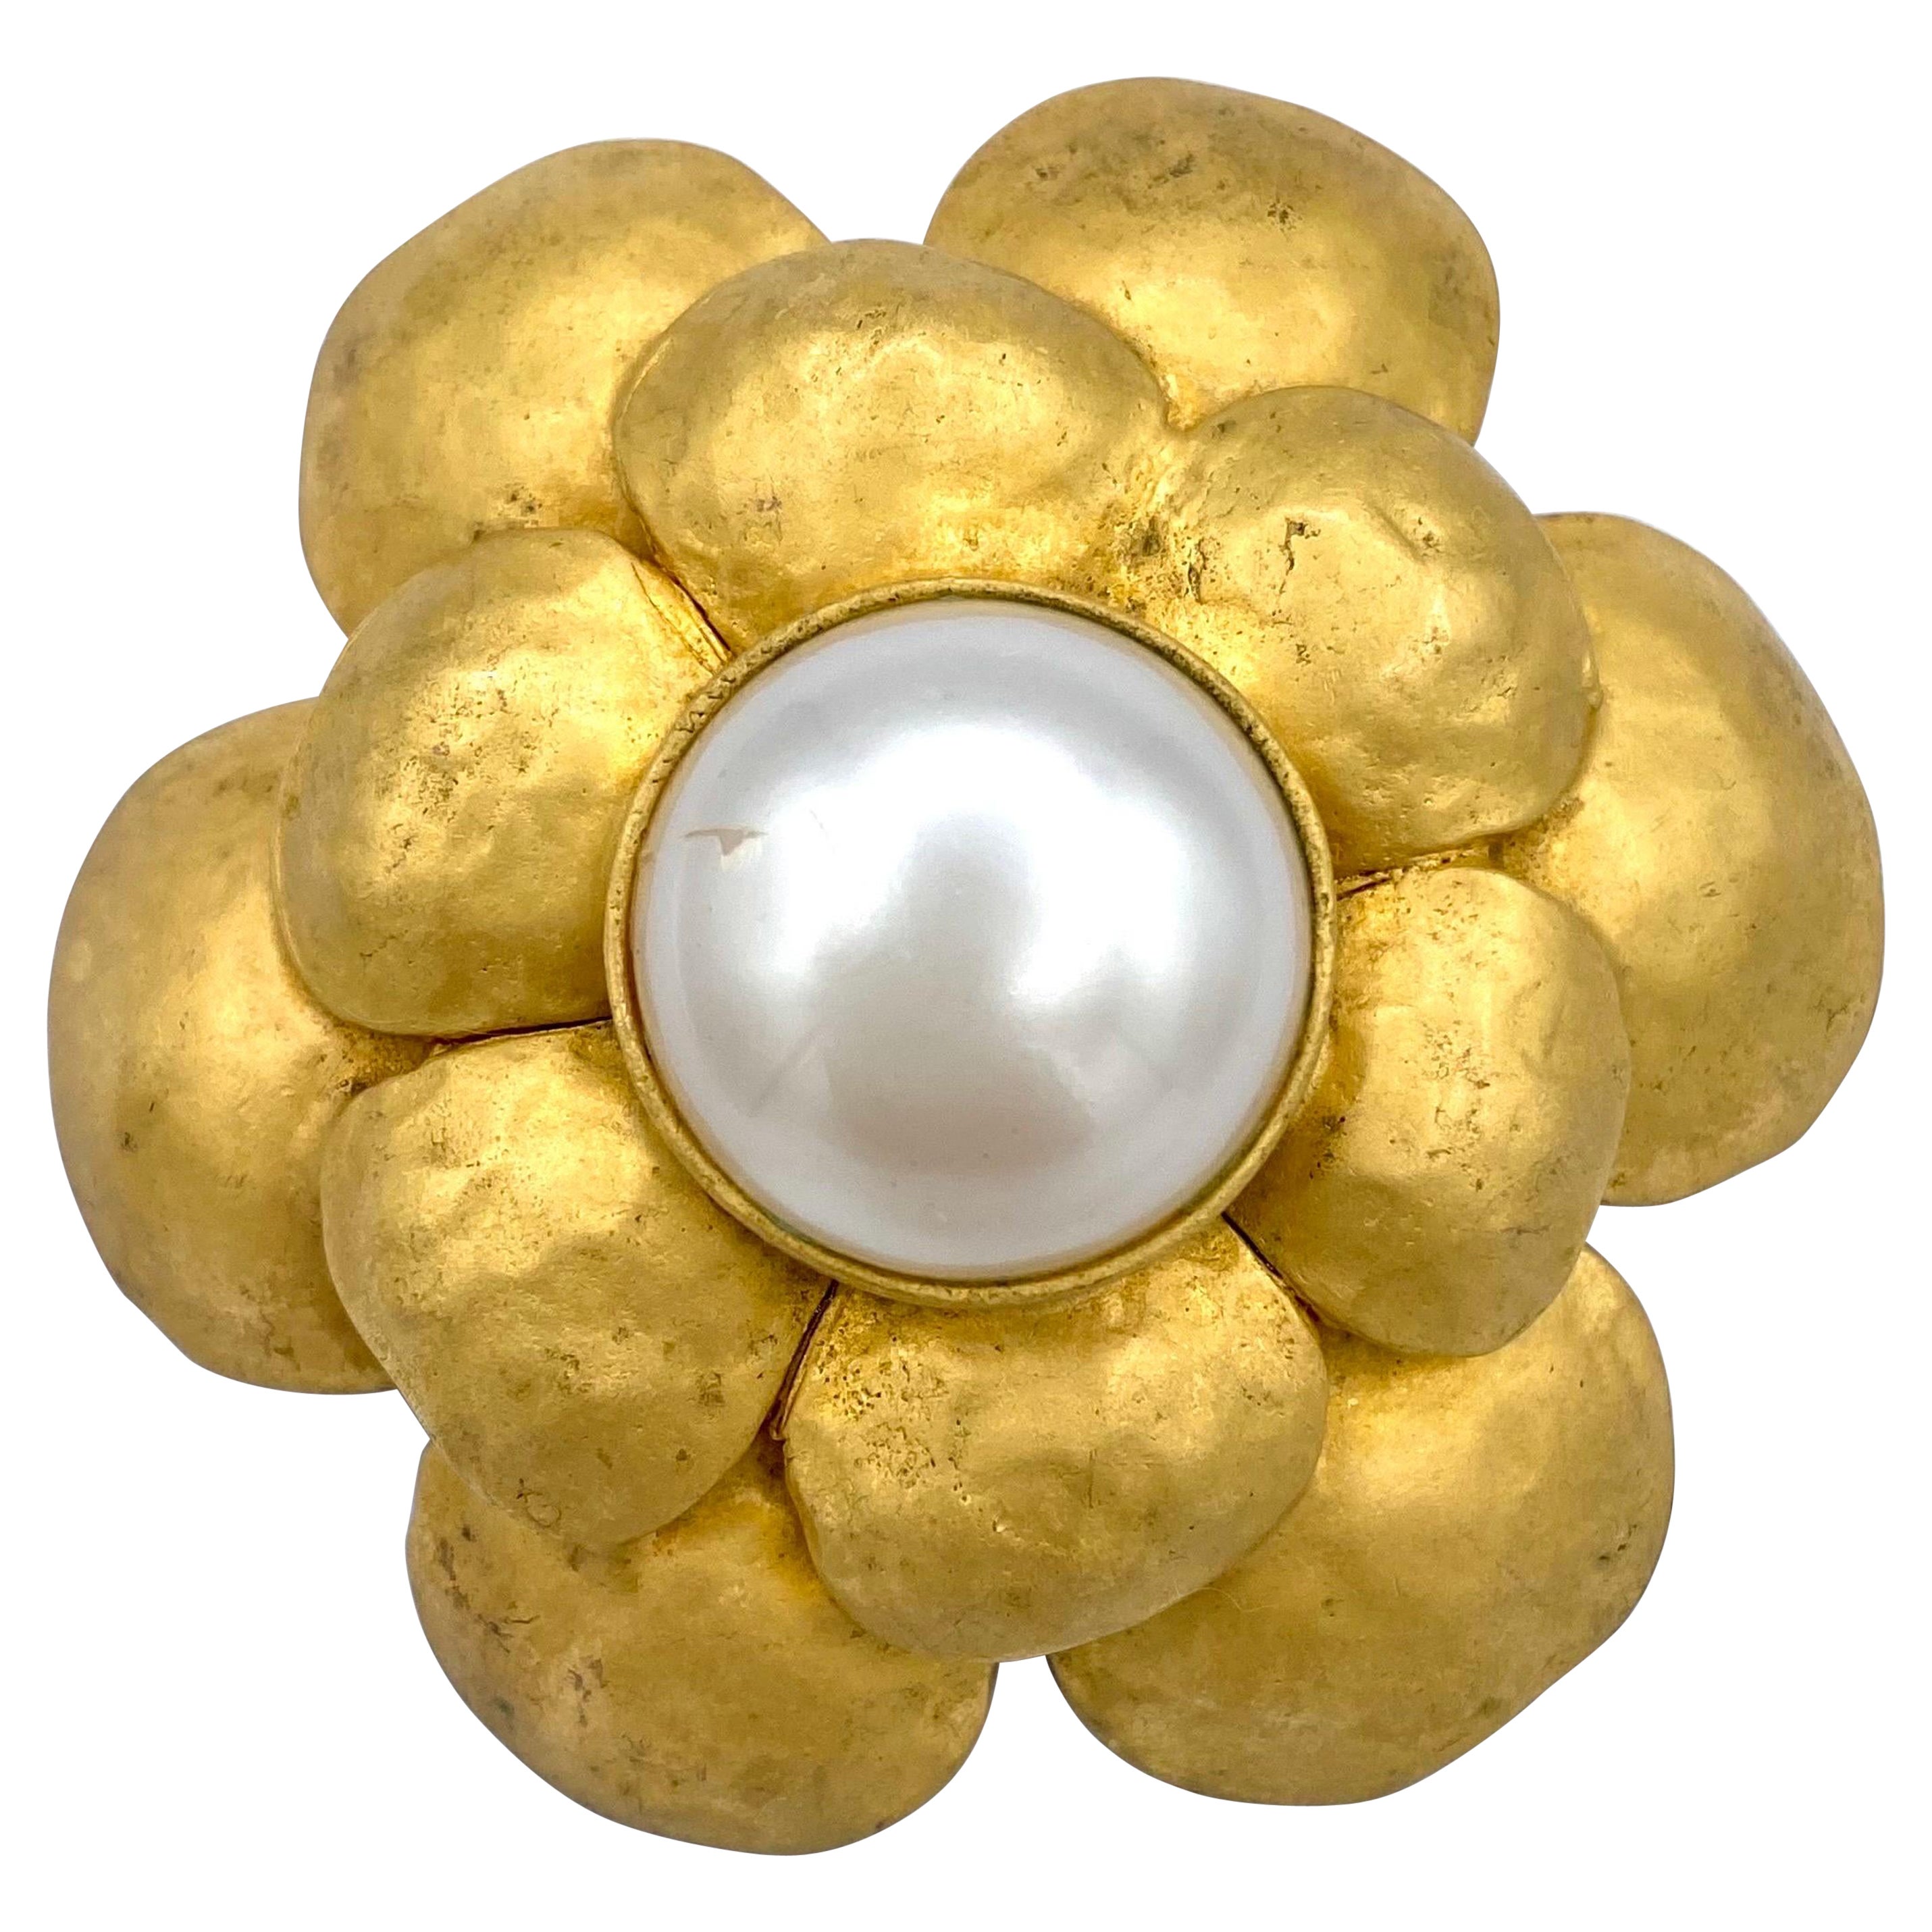 Vintage Chanel Camelia brooch in Gold métal from 1993